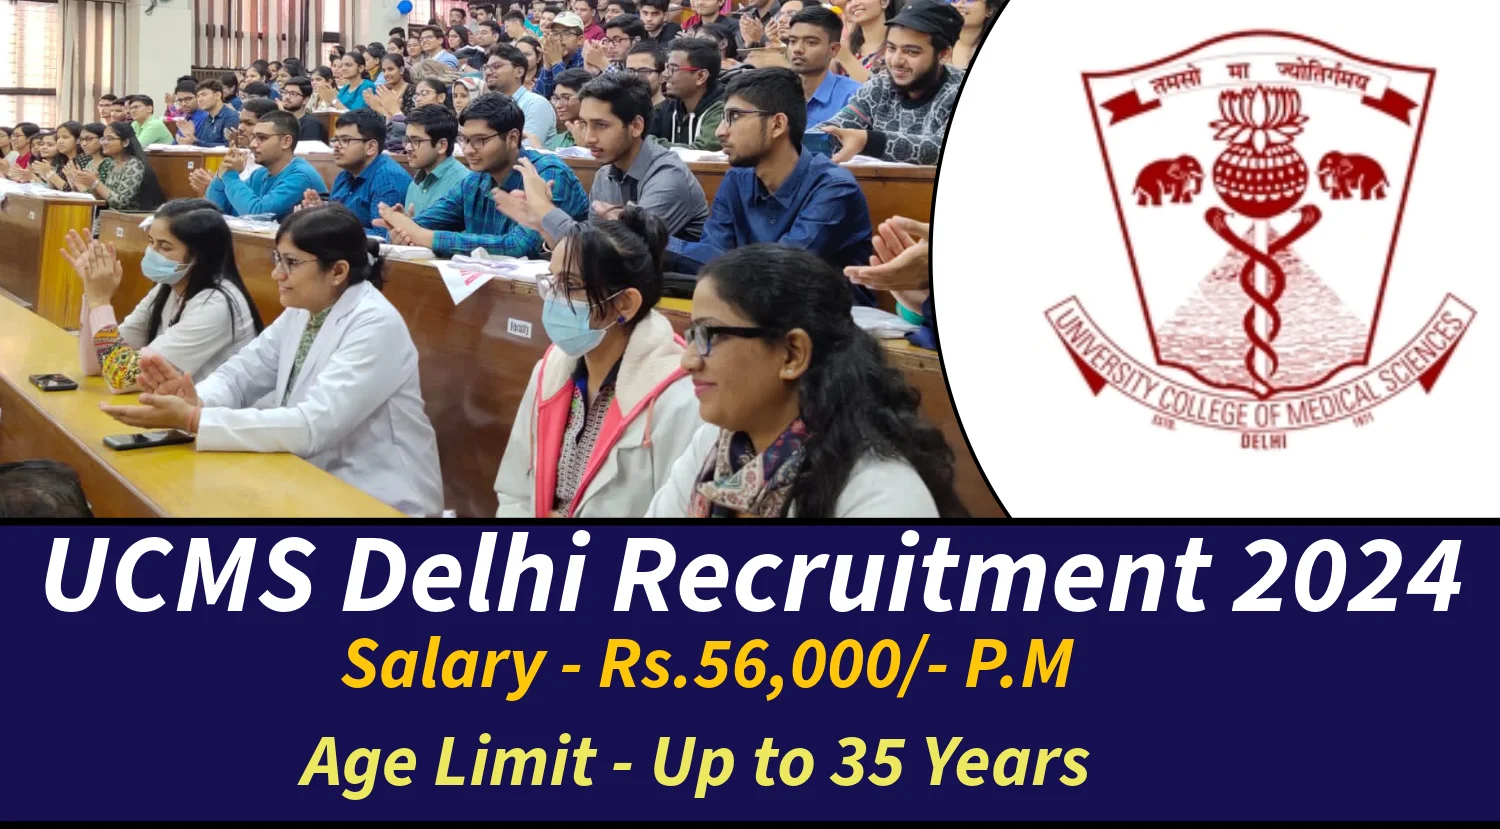 UCMS Delhi Recruitment 2024 Notification Out for Assistant, DEO and Other Vacancies